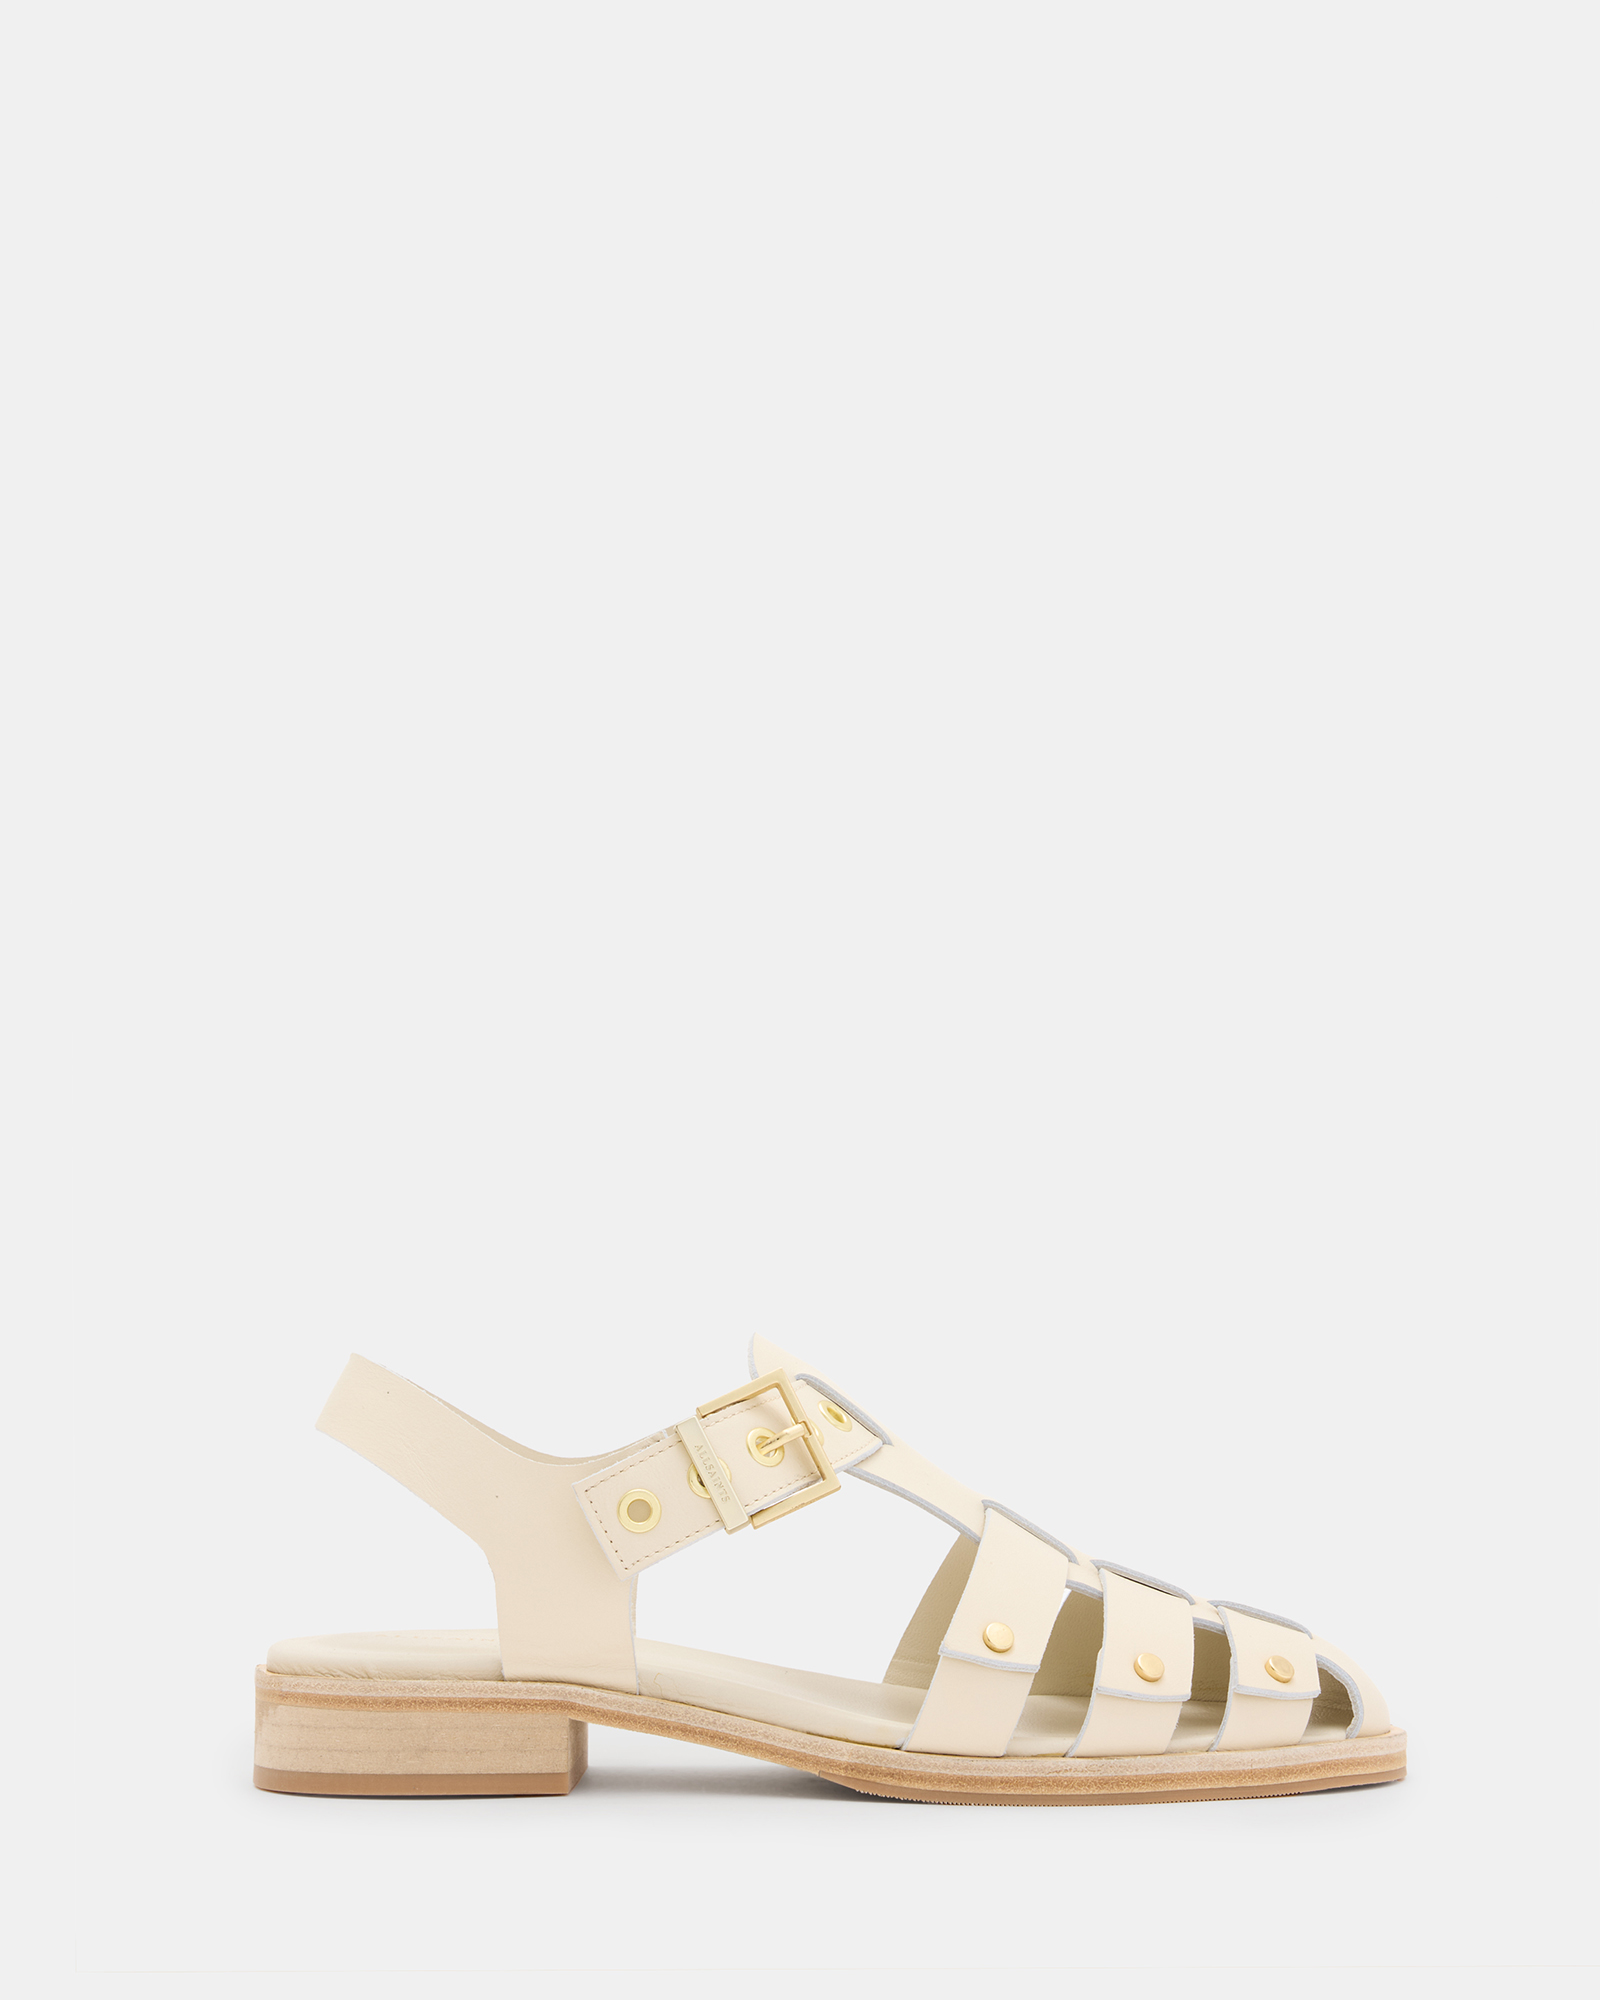 AllSaints Nelly Studded Leather Sandals,, Parchment White